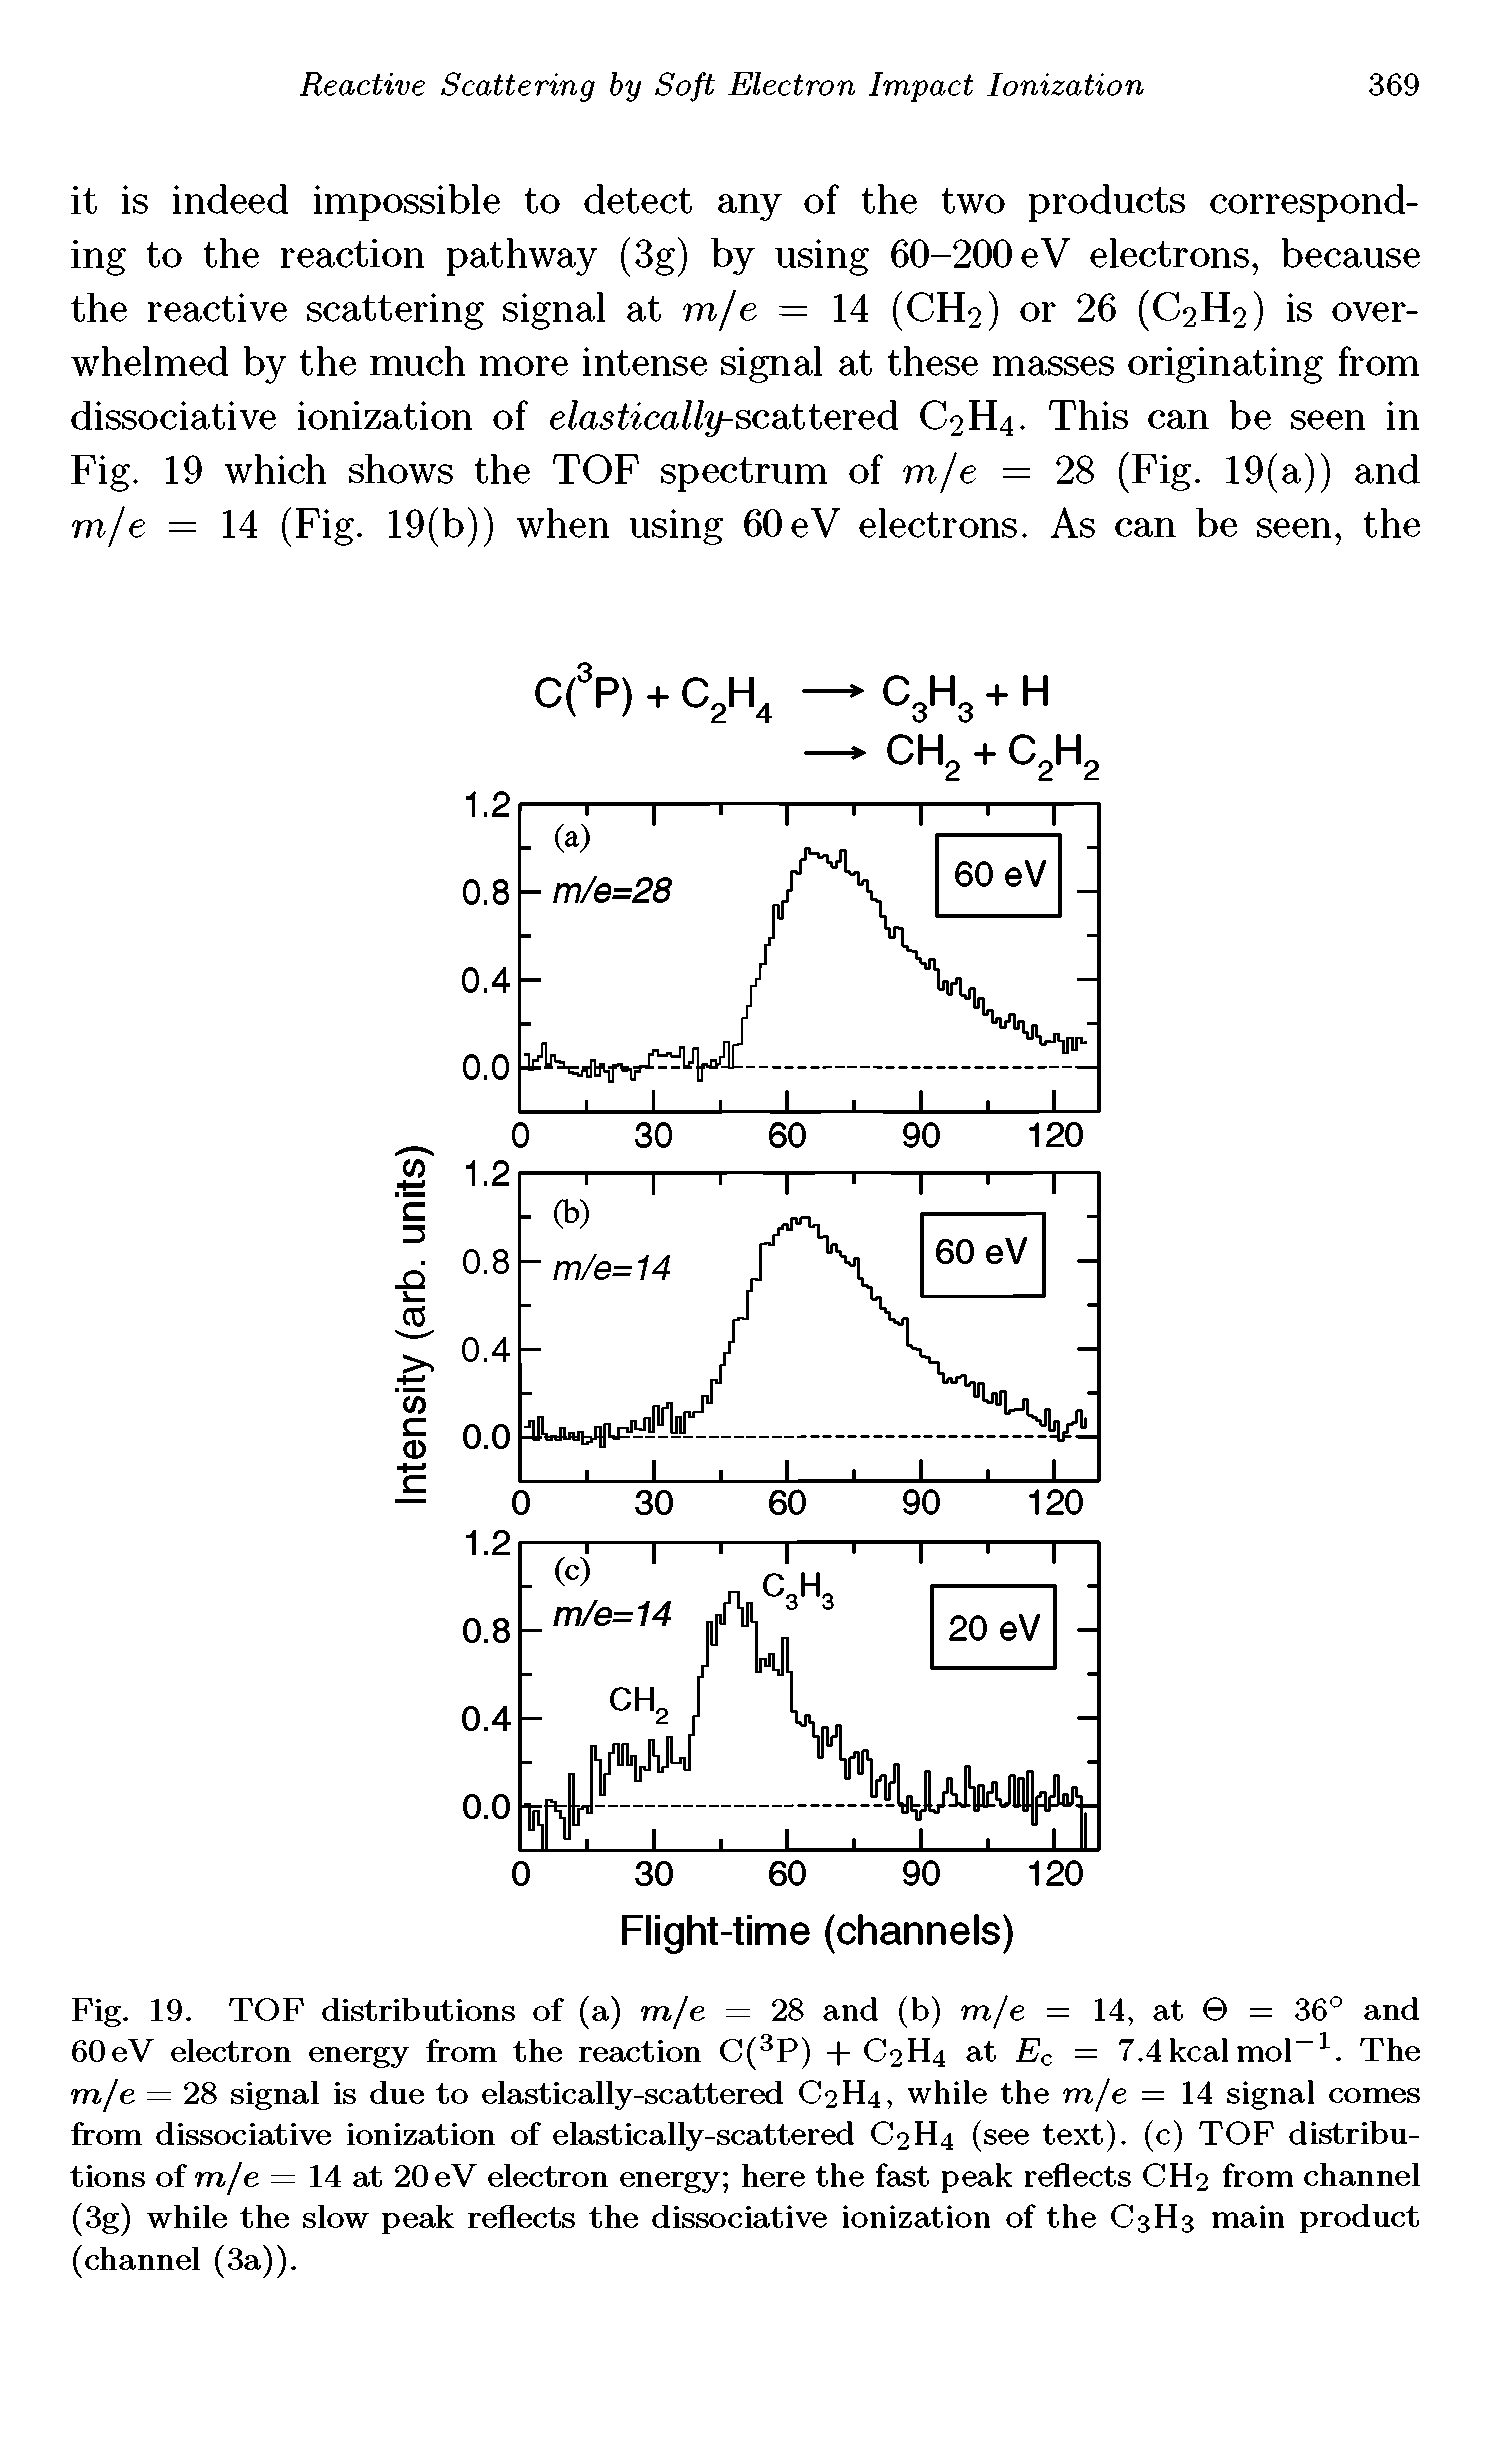 Fig. 19. TOF distributions of (a) m/e = 28 and (b) m/e = 14, at = 36° and 60eV electron energy from the reaction C(3P) + C2H4 at E, = 7.4kcalmol-1. The m/e = 28 signal is due to elastically-scattered C2H4, while the m/e = 14 signal comes from dissociative ionization of elastically-scattered C2H4 (see text), (c) TOF distributions of m/e = 14 at 20 eV electron energy here the fast peak reflects CH2 from channel (3g) while the slow peak reflects the dissociative ionization of the C3H3 main product (channel (3a)).